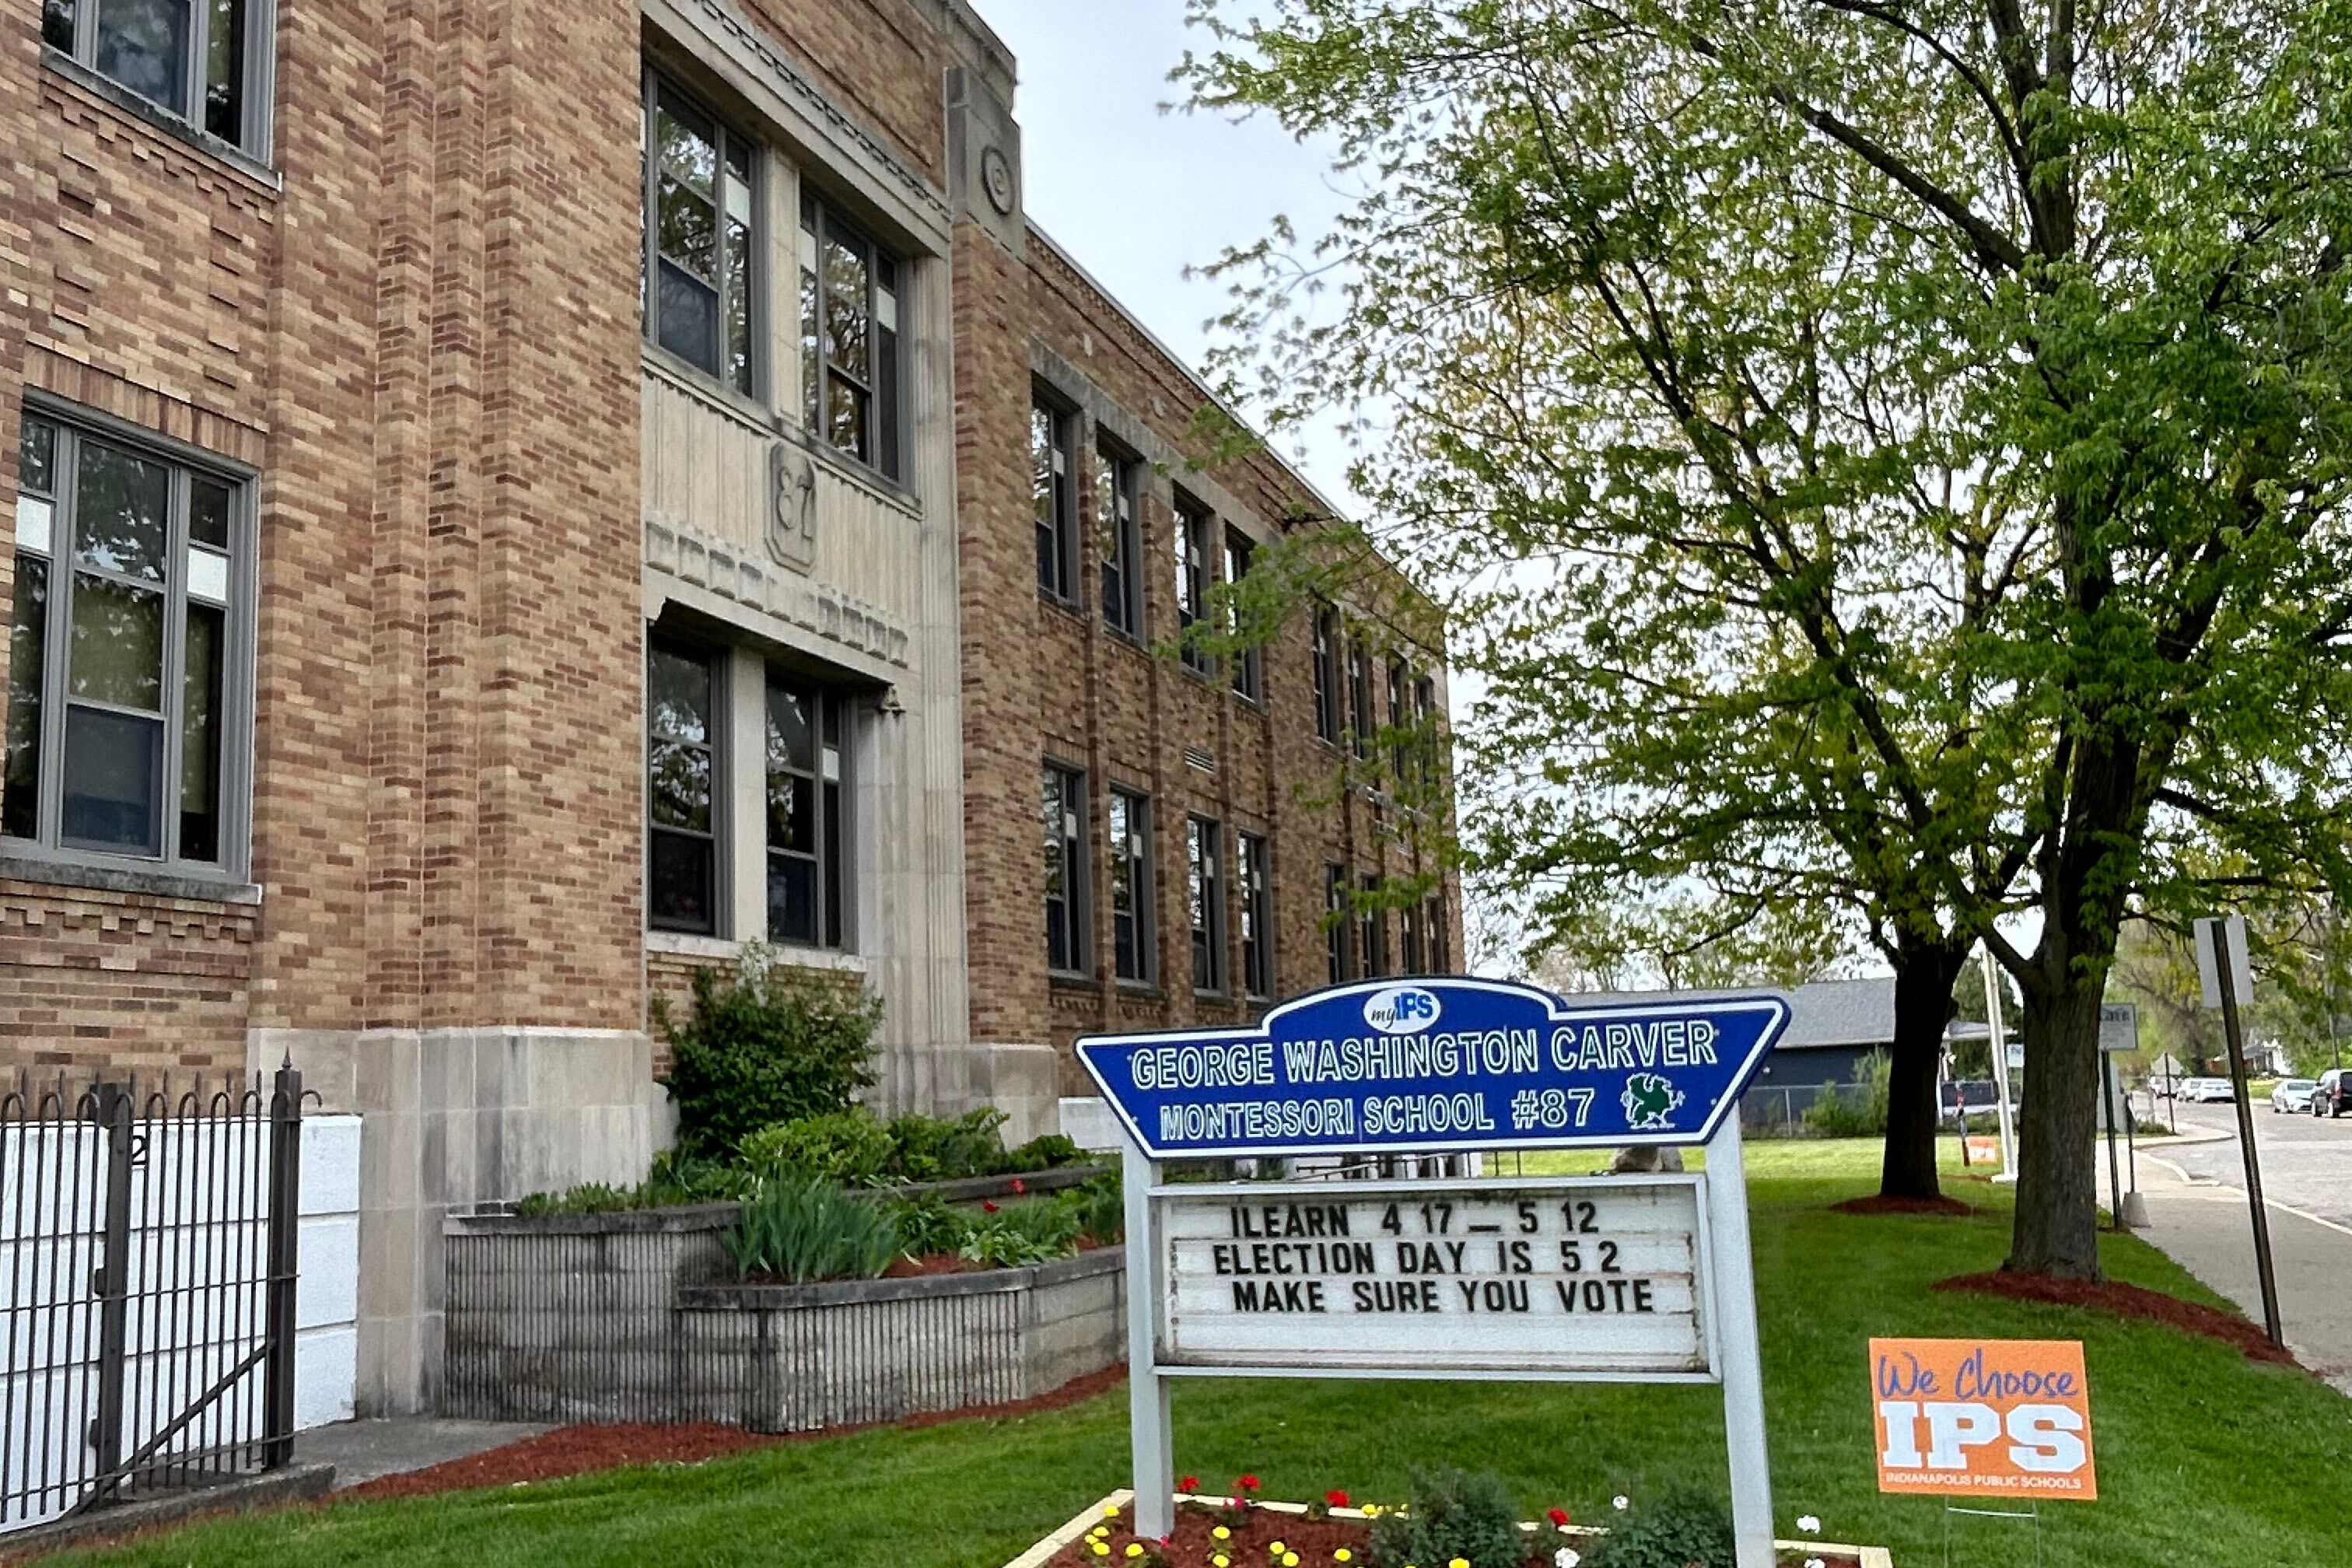 A blue and white sign in a green lawn in front of a large stone school building.